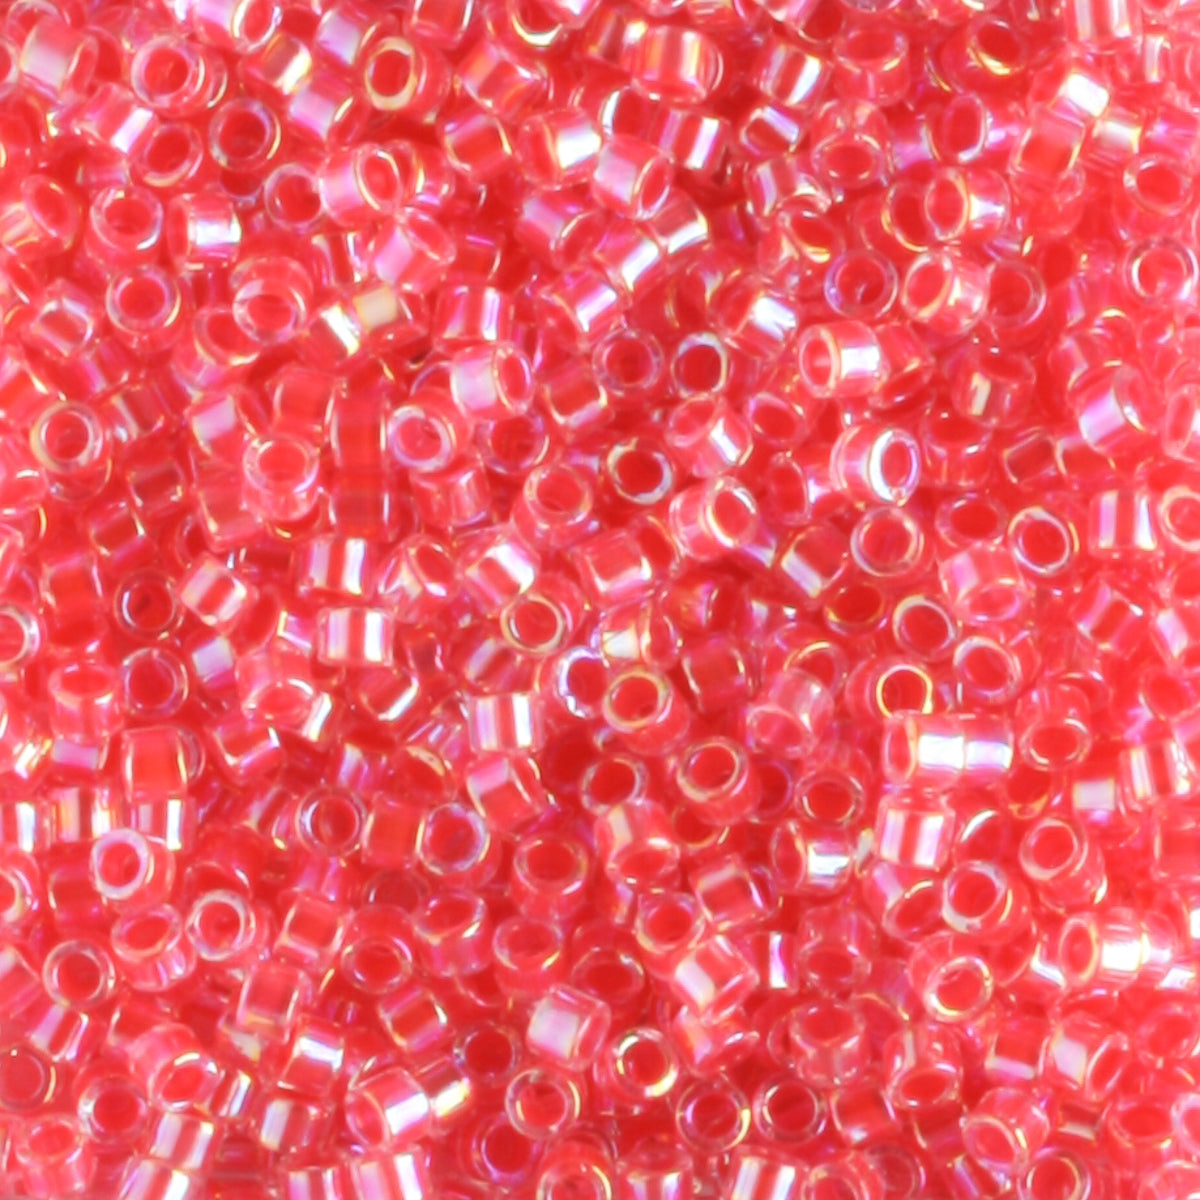 DB0075 Light Strawberry Lined Crystal - 5 grams